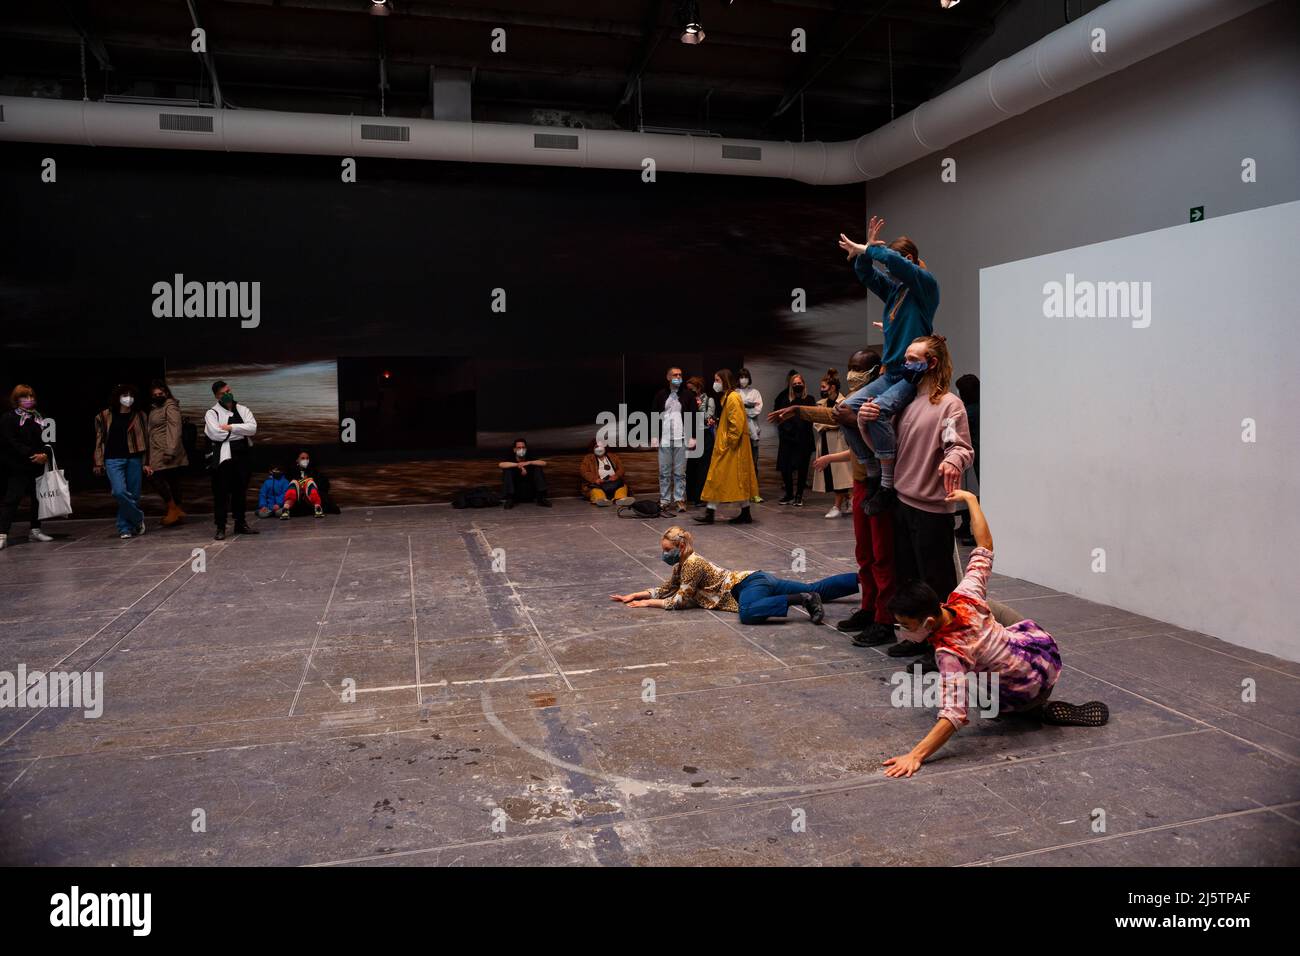 VENICE, ITALY - April 20: View of the performance titled Encyclopedia of Relations by Alexandra Pirici at the 59th Venice biennale on April 20, 2022 Stock Photo